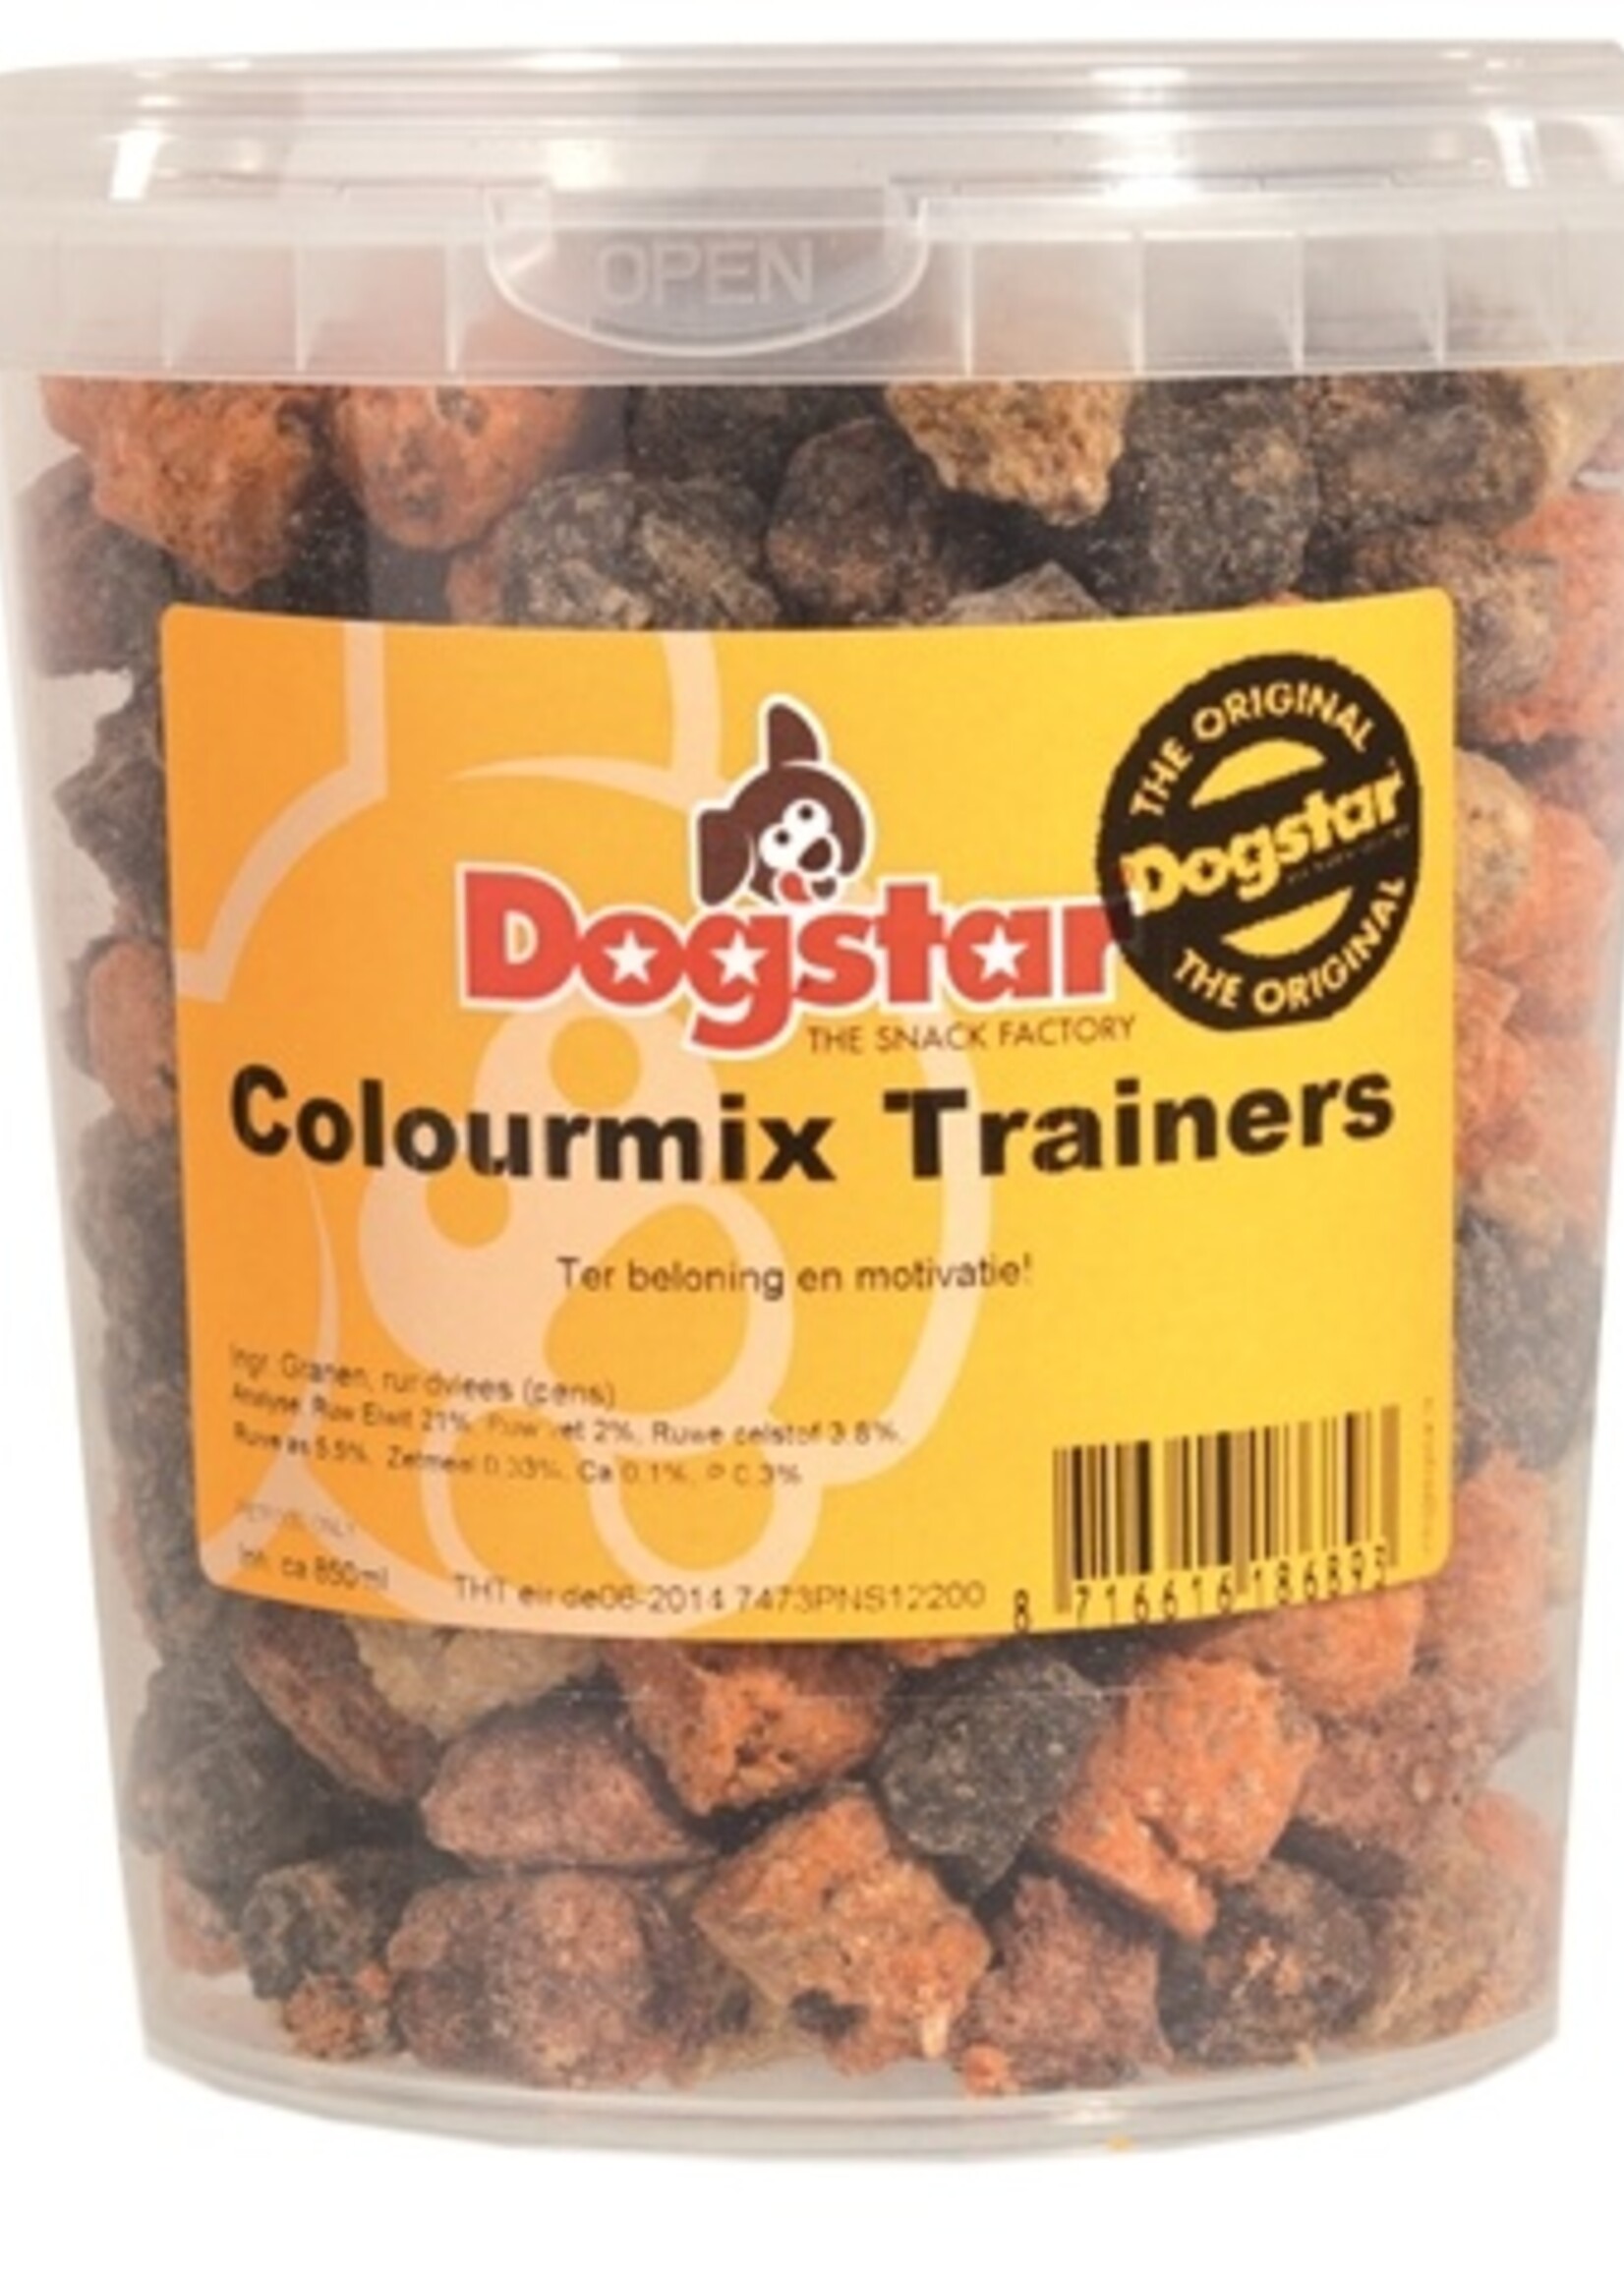 Dogstar Dogstar colour mixtrainers